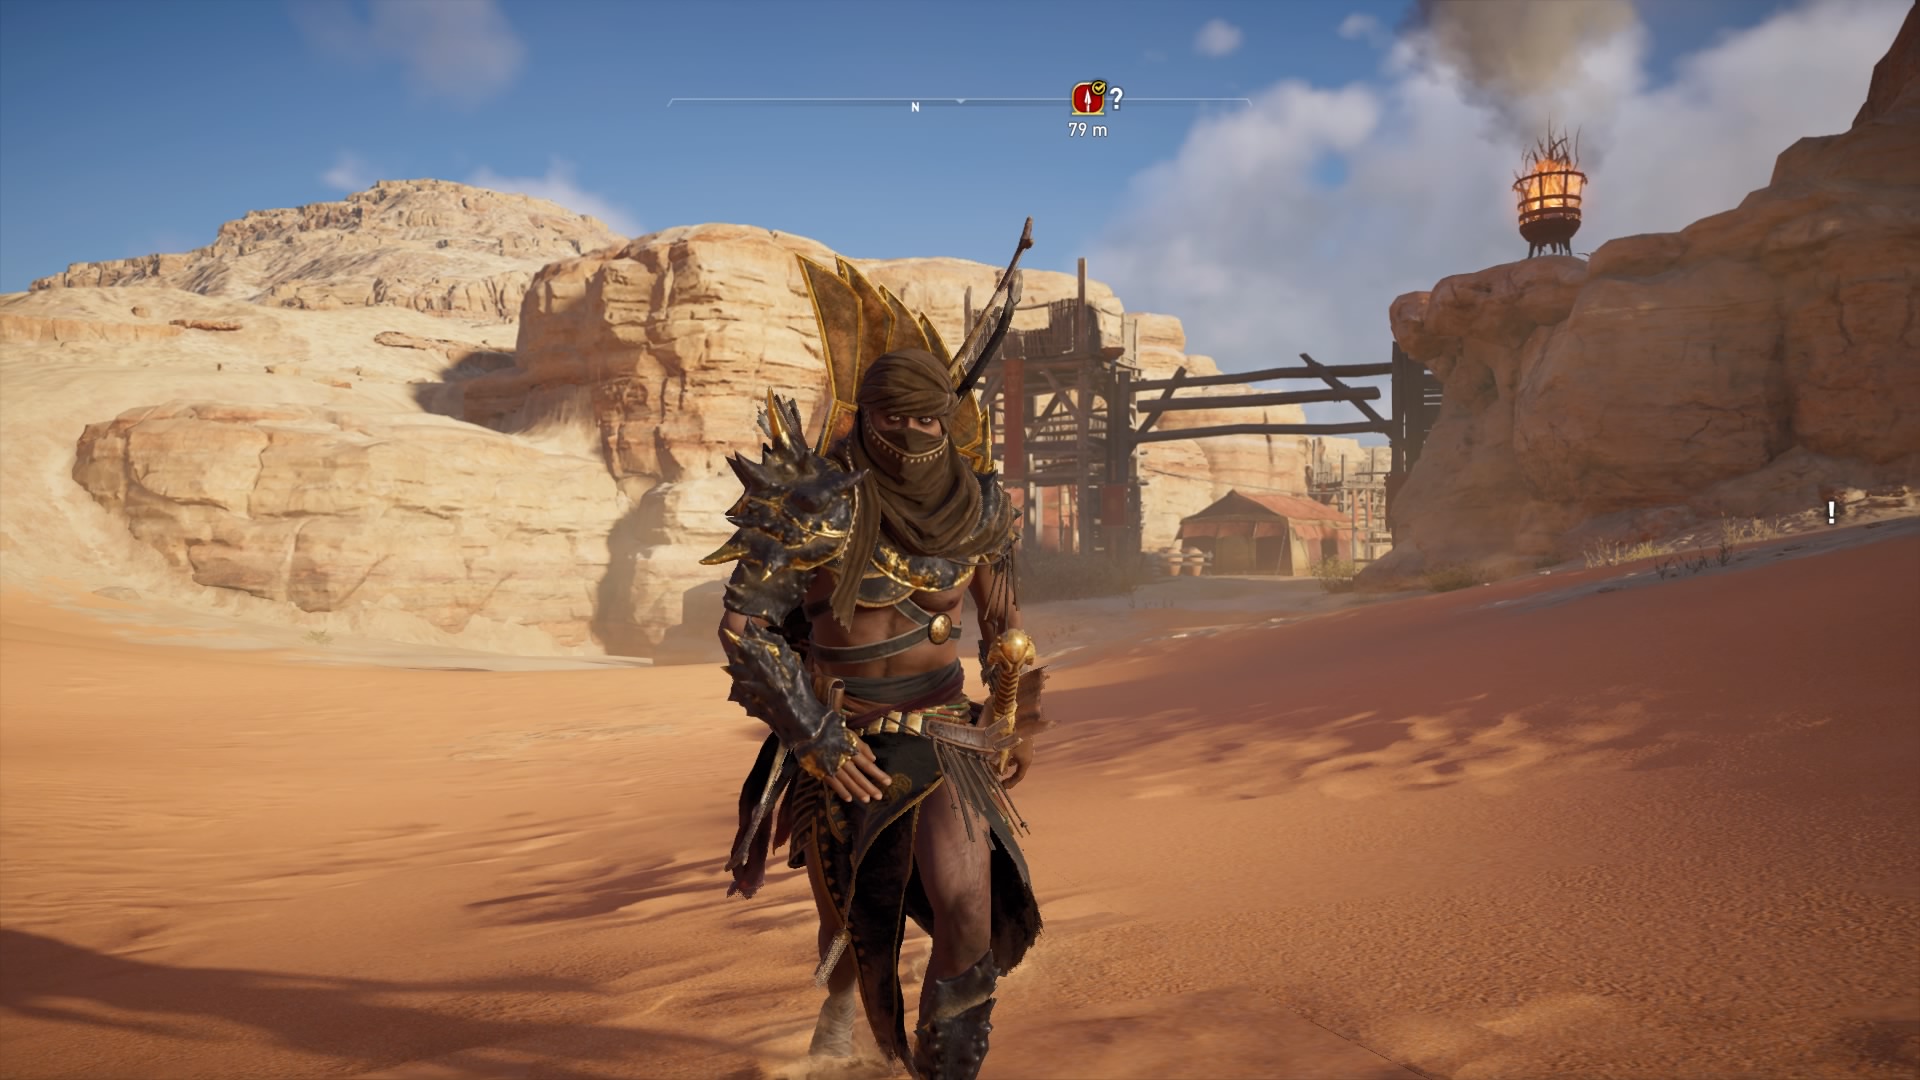 Buy Assassins Creed Origins The Curse of the Pharaohs